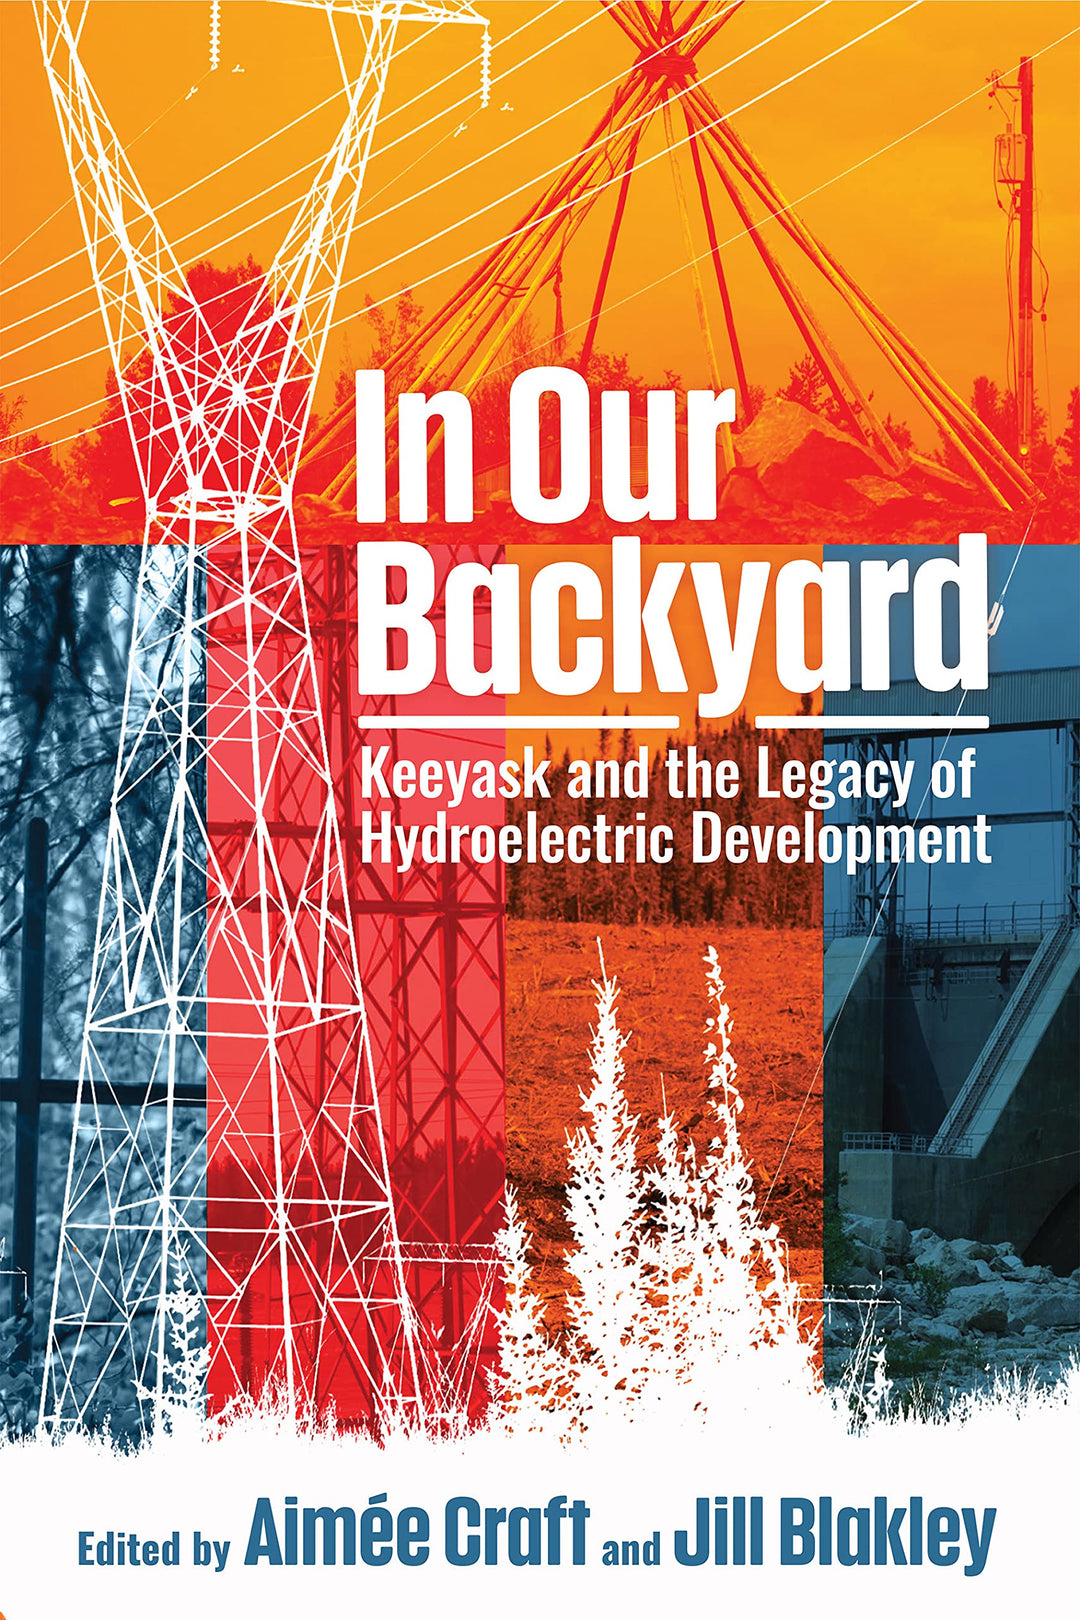 In Our Backyard: Keeyask and the Legacy of Hydroelectric Development edited by Aimée Craft & Jill Blakley